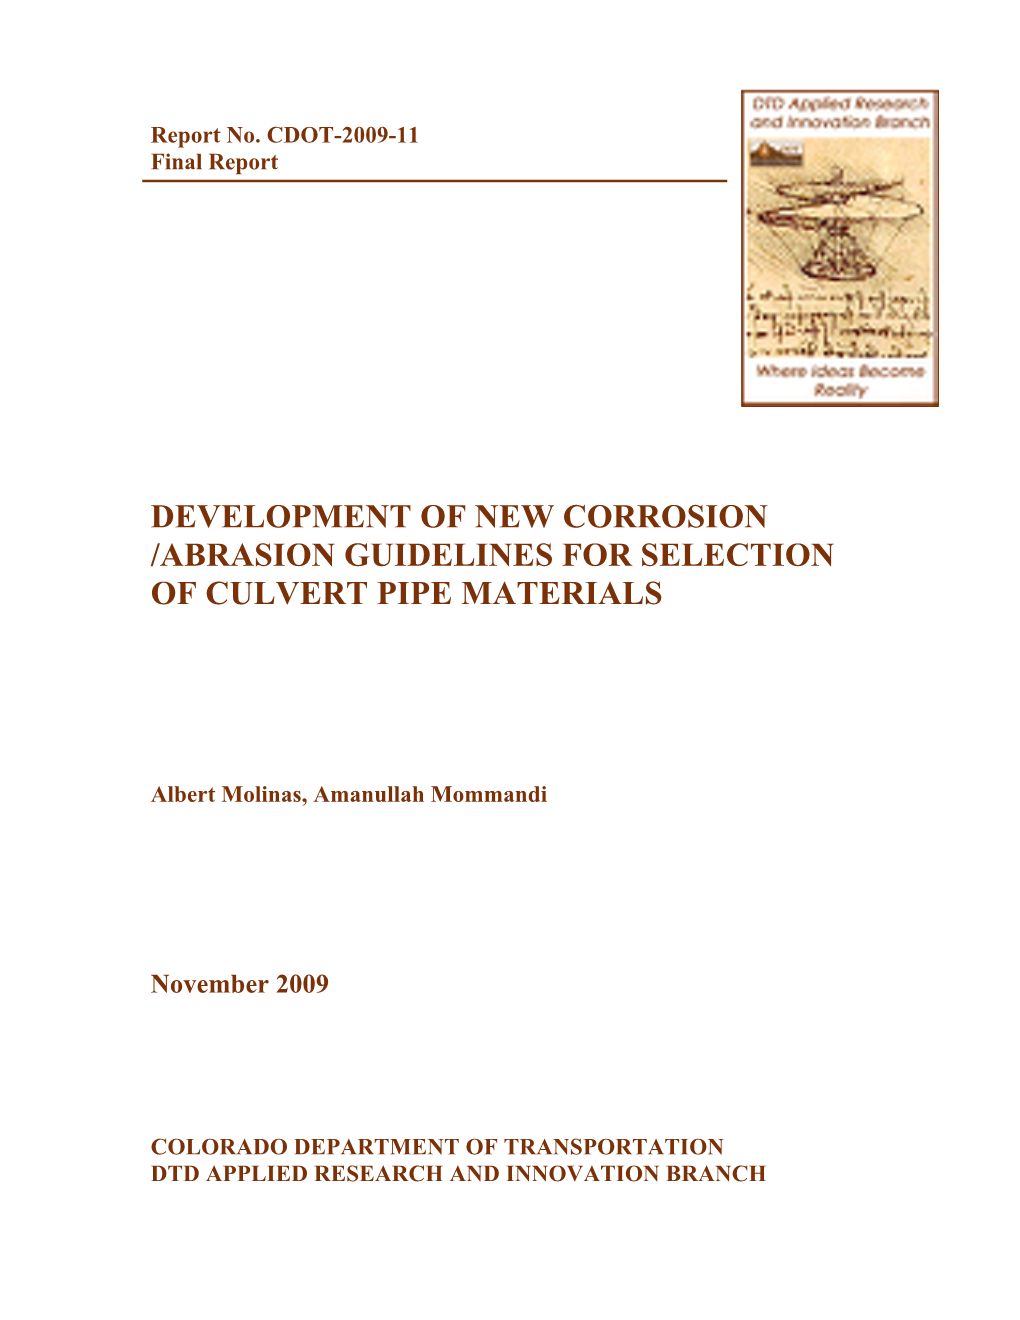 Development of New Corrosion/Abrasion Guidelines For